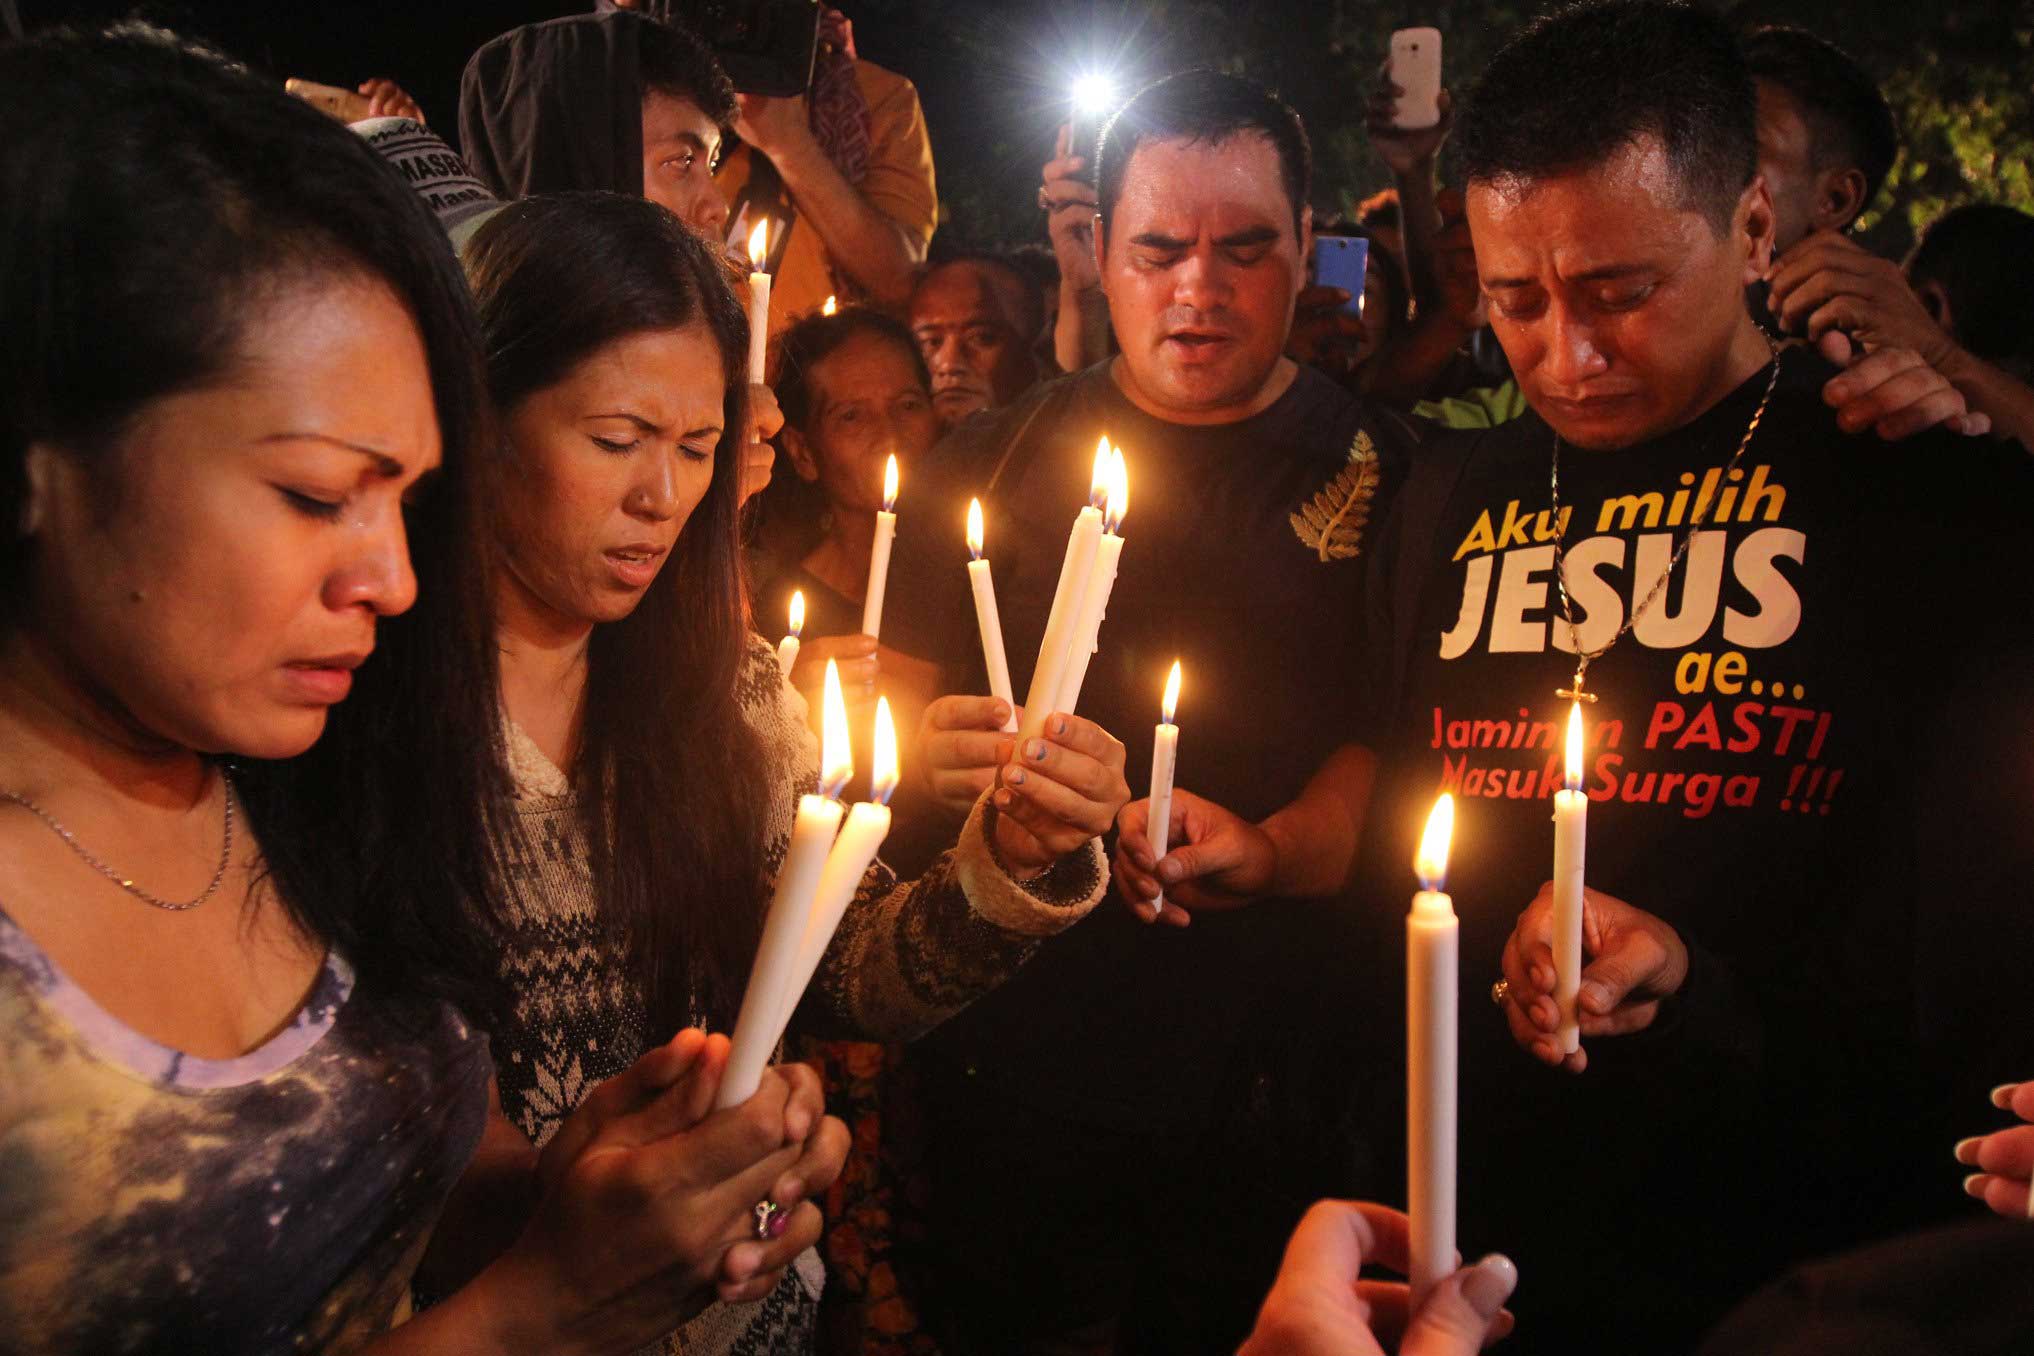 People hold candles to pray for death-row prisoners at Wijayapura port in Cilacap, Indonesia on April 29, 2015.